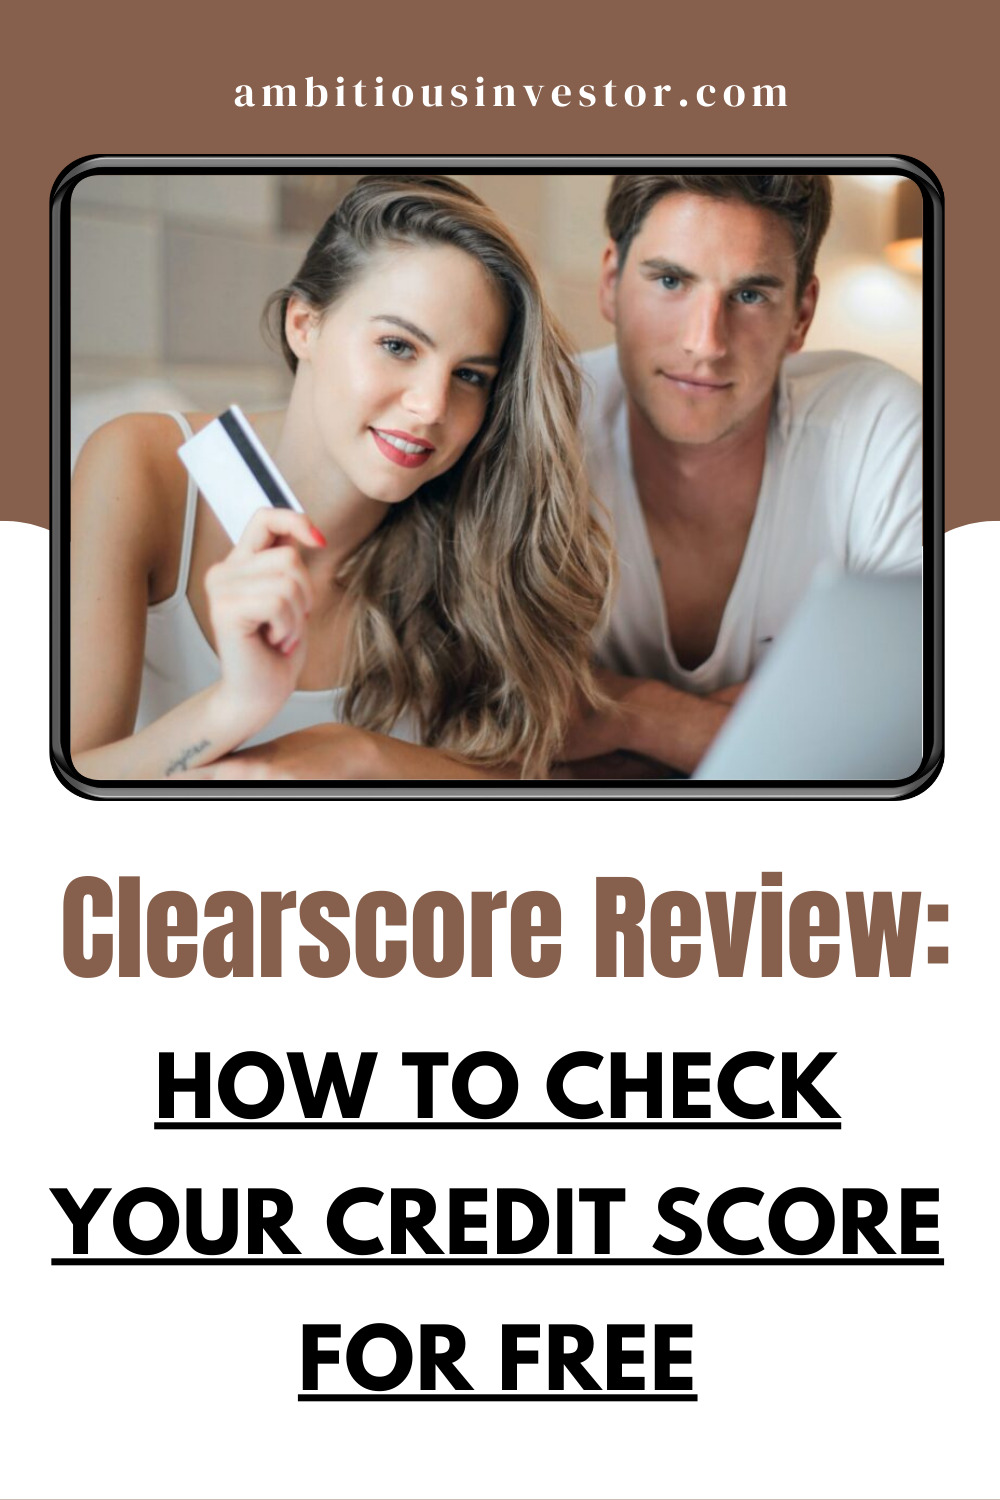 Clearscore Review: How to Check Your Credit Score for Free